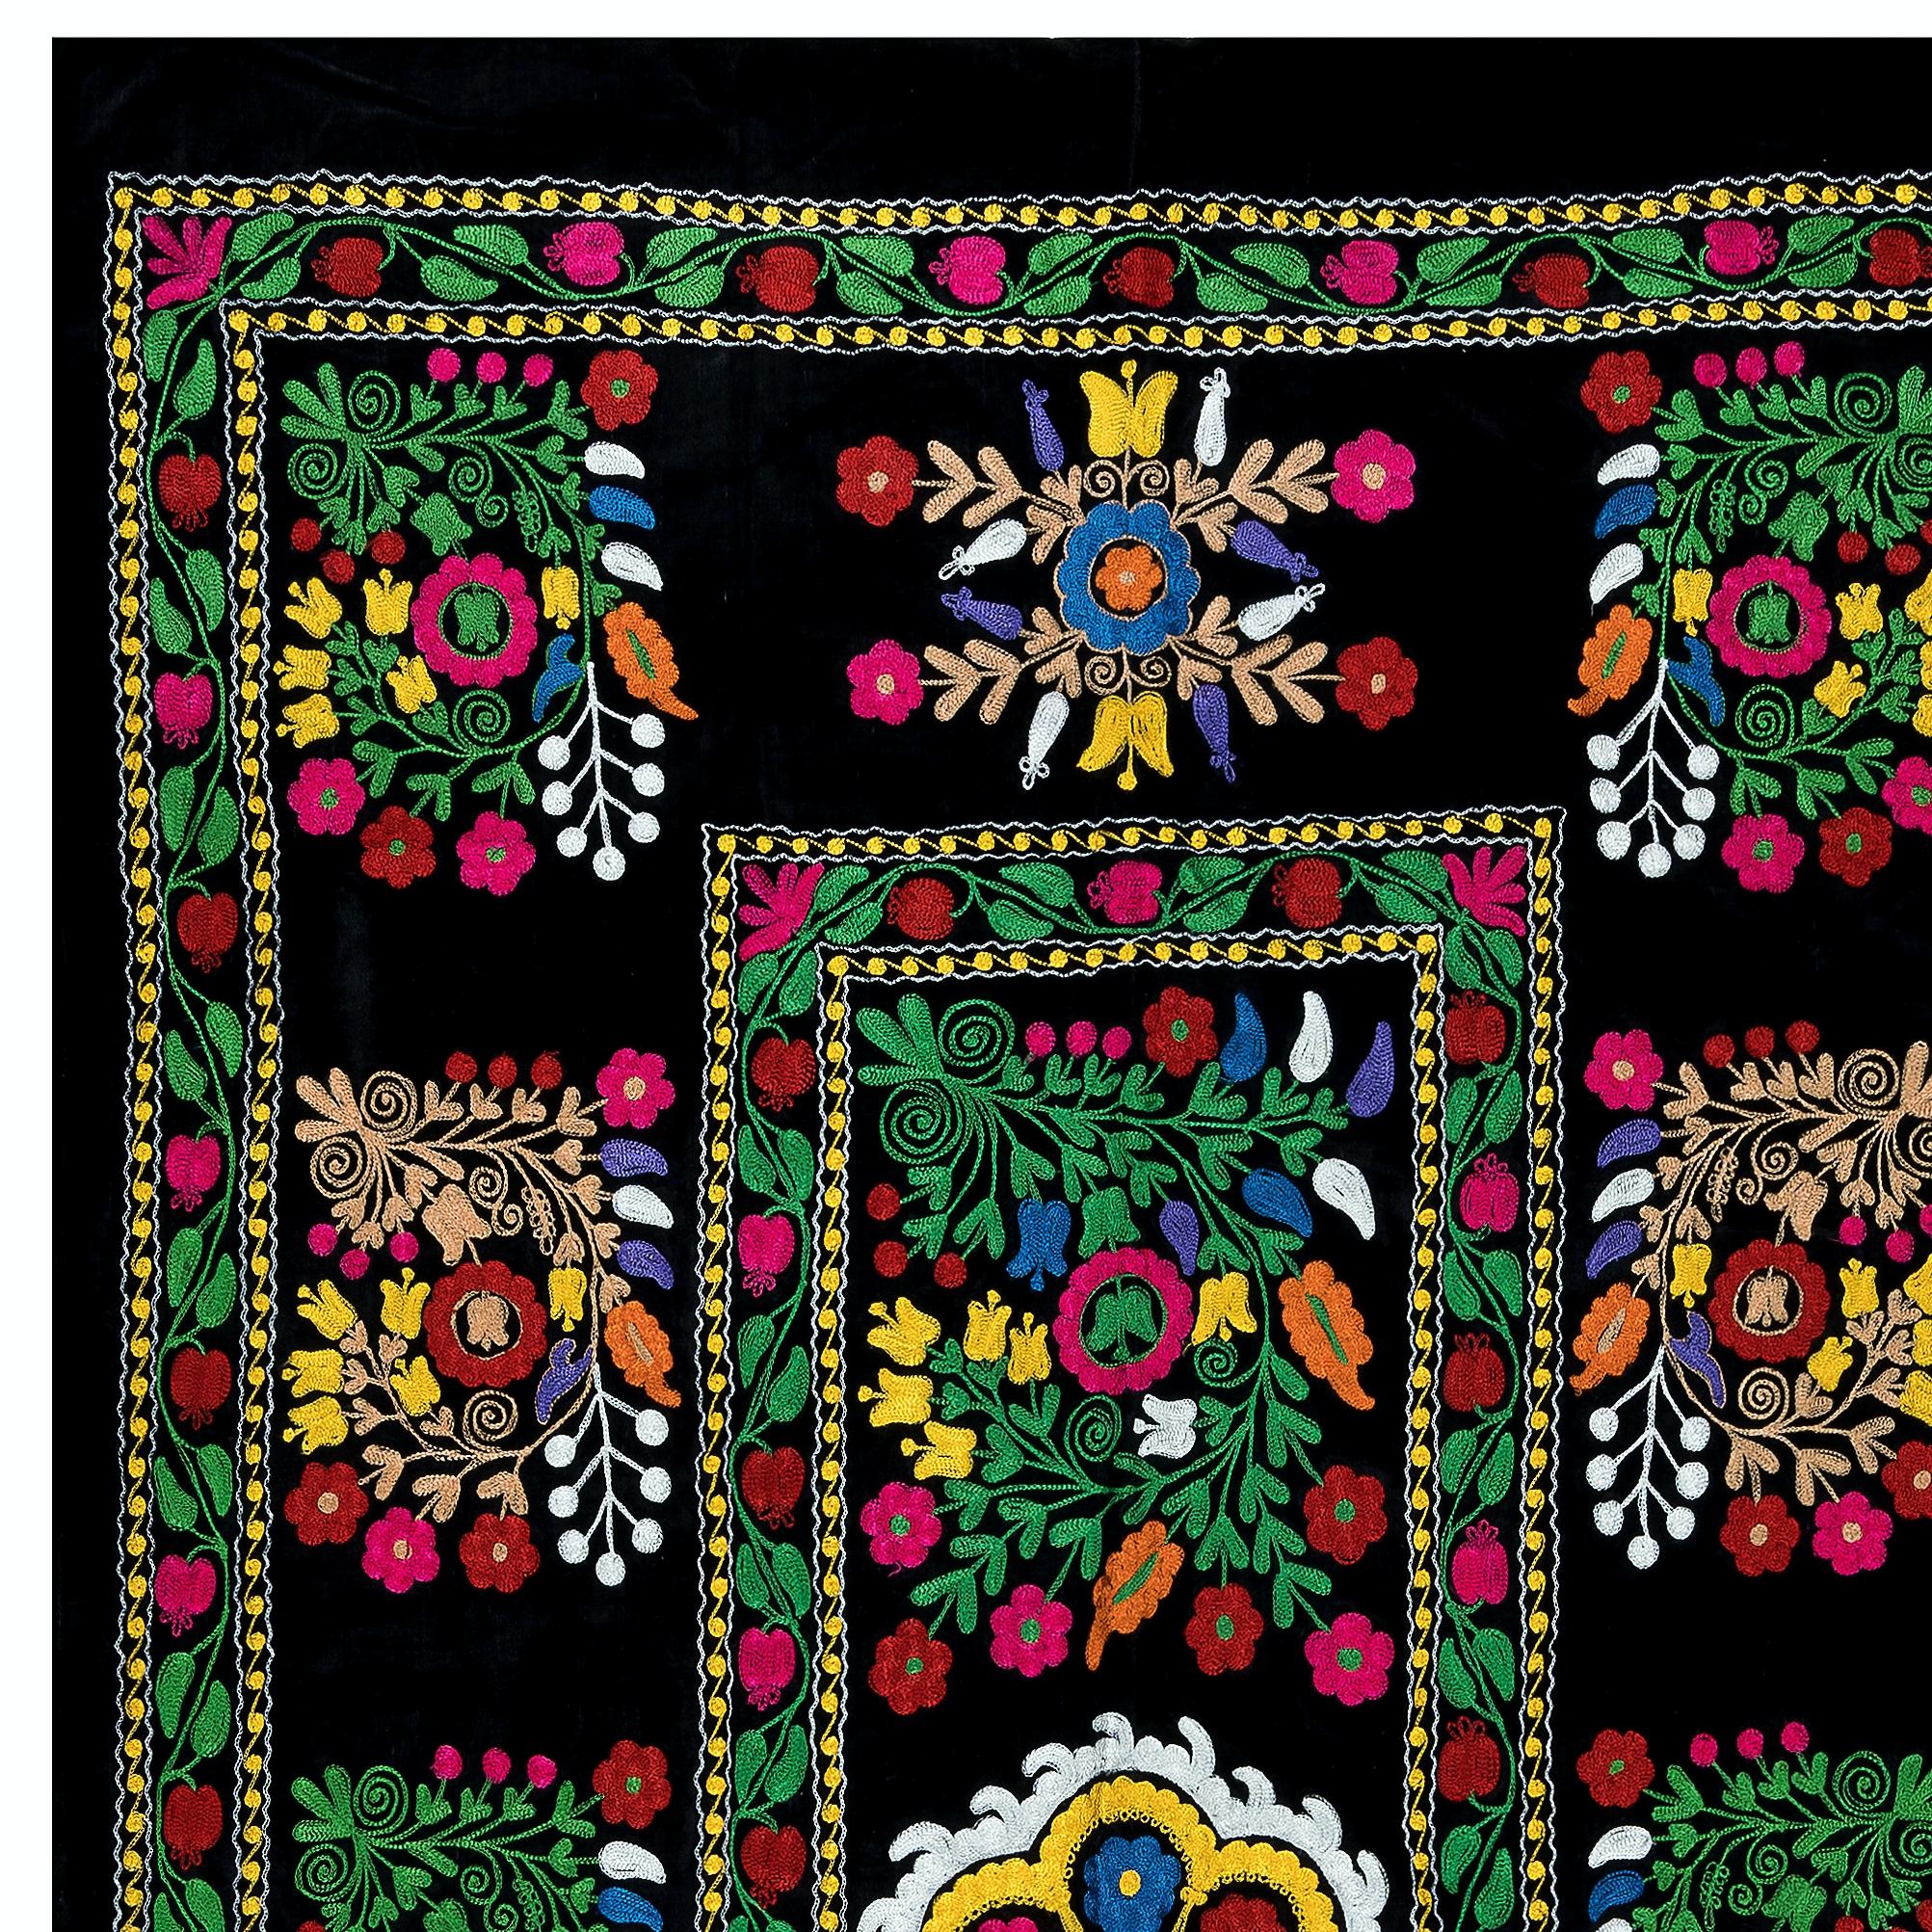 Suzani, a Central Asian term for a specific type of needlework, is also the broader name for the hugely popular decorative pieces of textile that feature this needlework in vivid colors with bold, expressive floral and botanical designs, natural